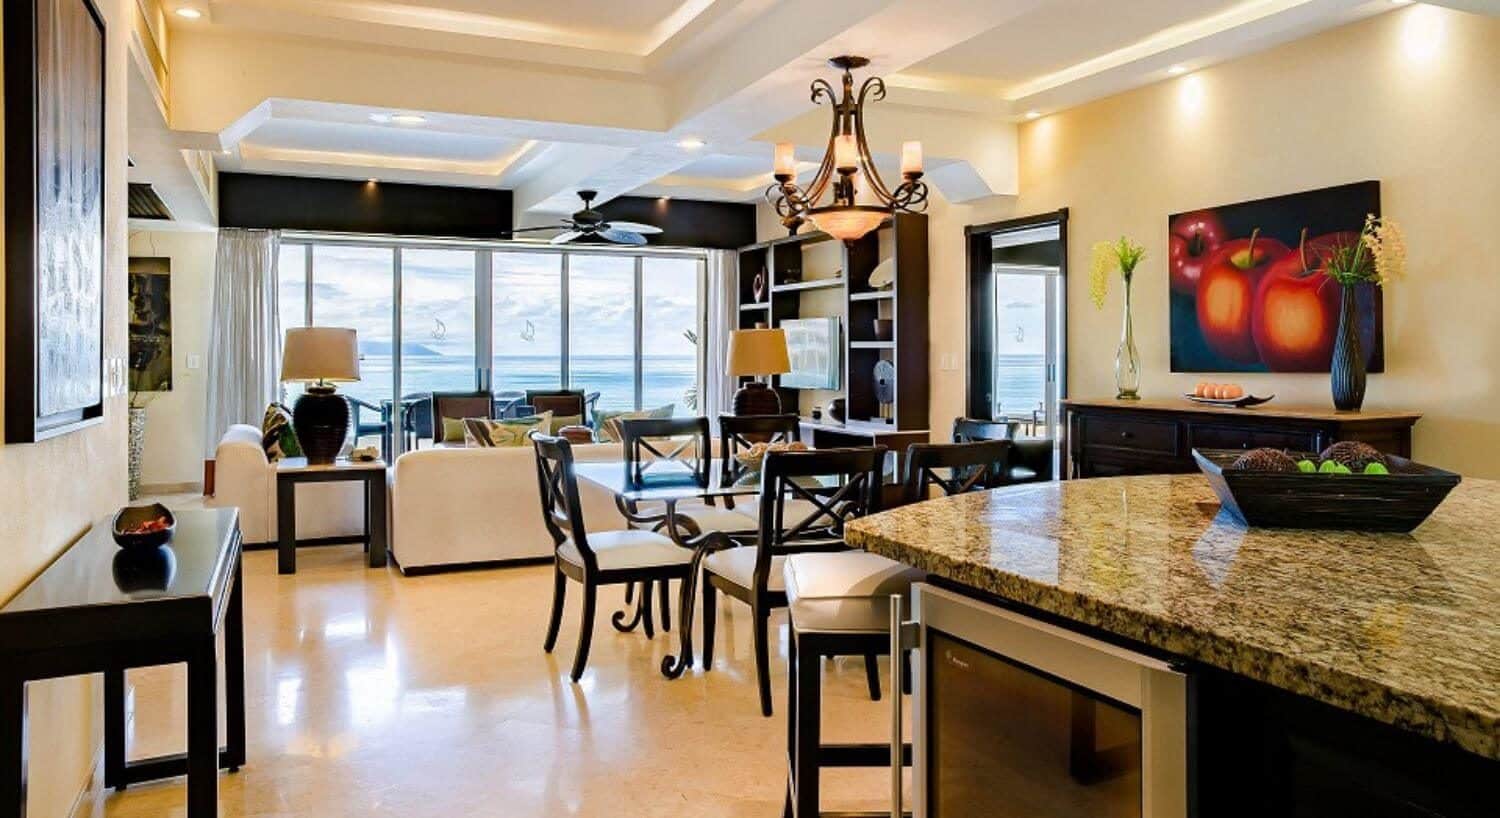 An open living and dining area including a breakfast bar with stools, dining table and chairs, and living area with plush sofas and chairs, leading out to a balcony with outdoor furniture, and views of the ocean.